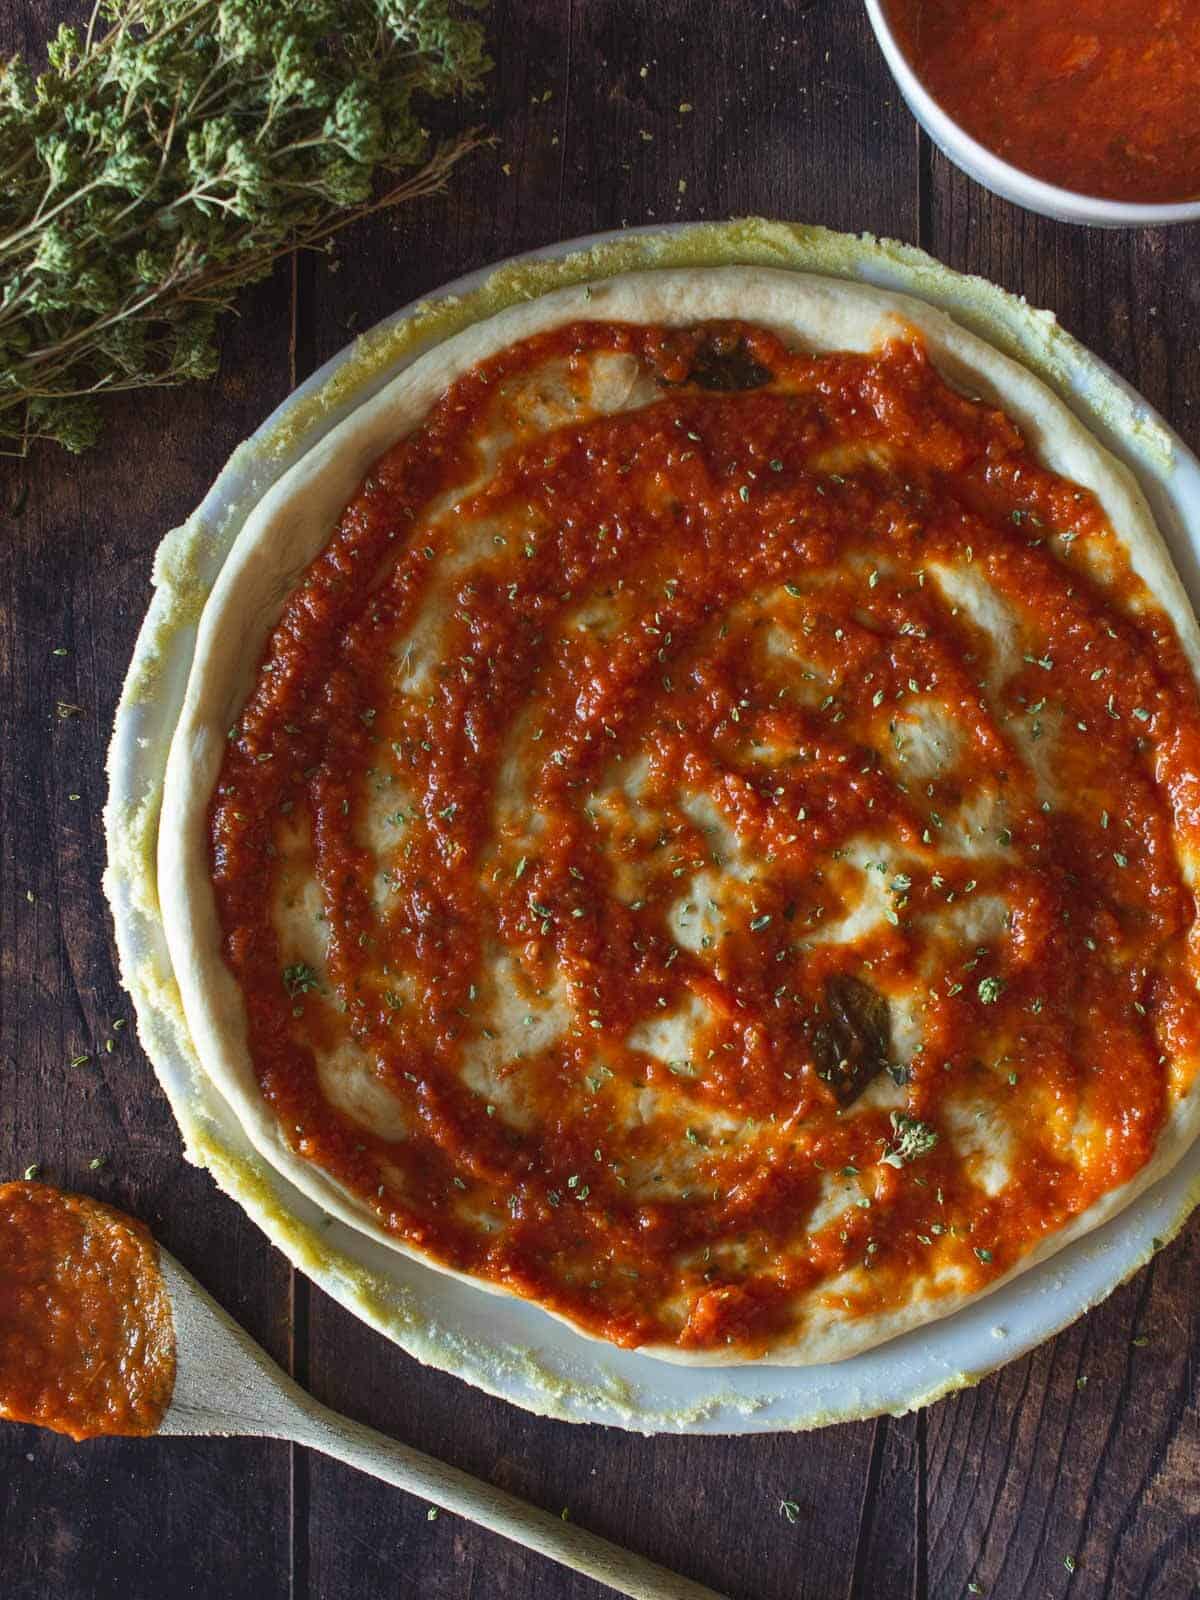 extended pizza dough with tomato sauce